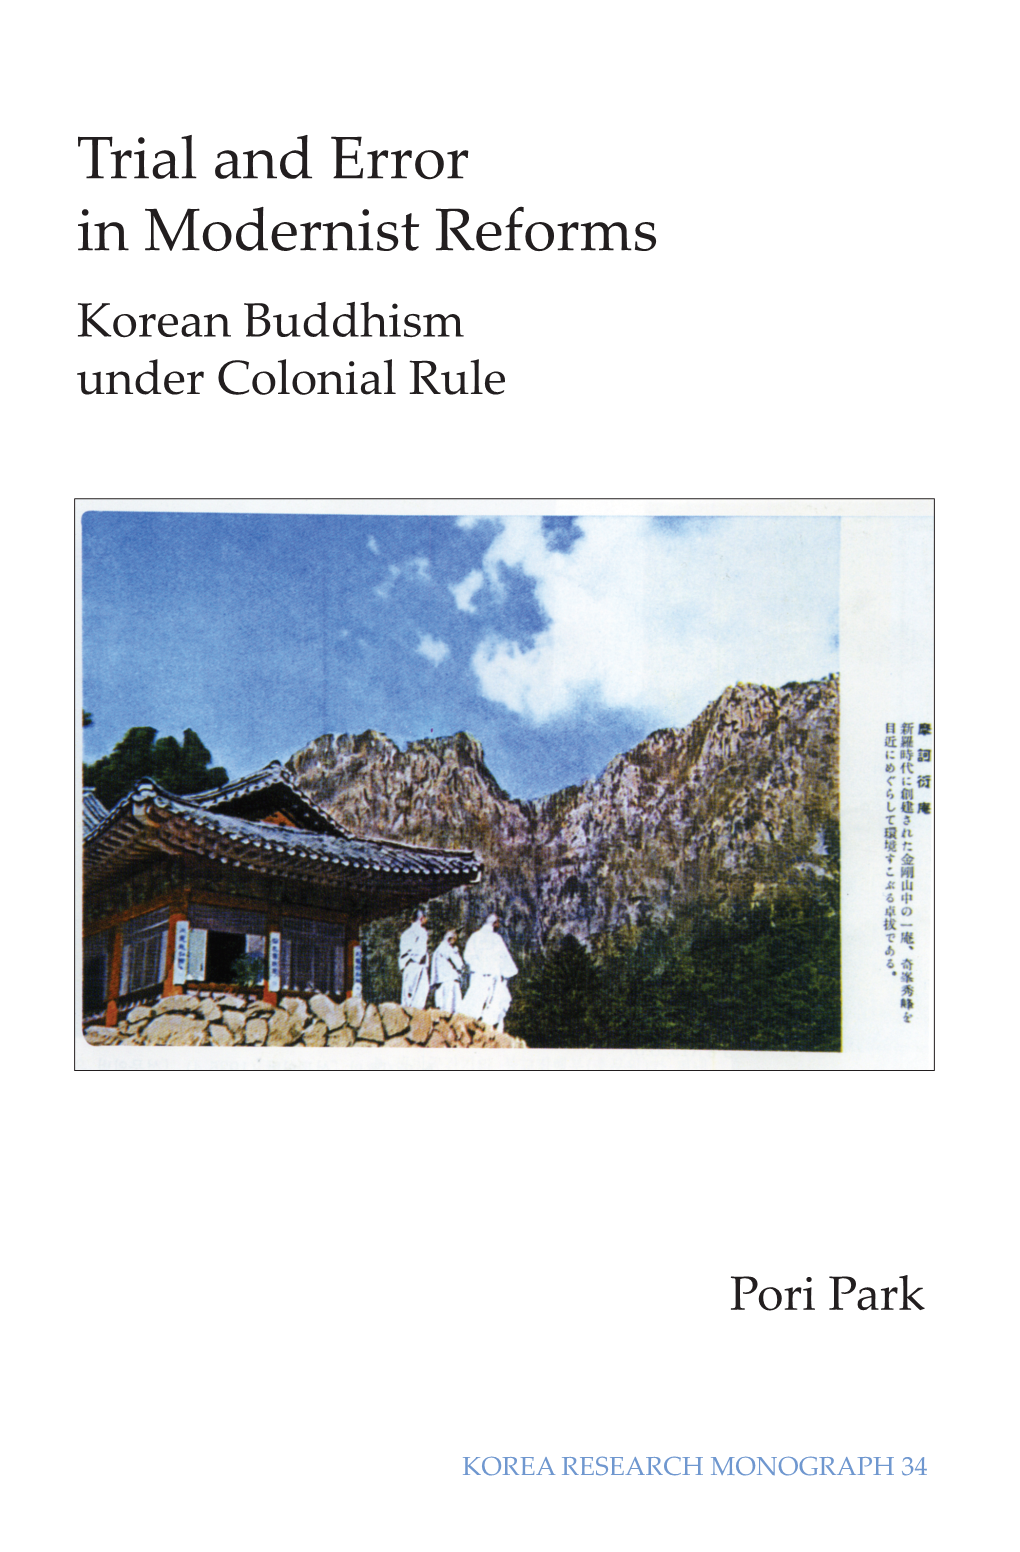 Trial and Error in Modernist Reforms Trial and Error in Modernist Reforms Korean Buddhism Under Colonial Rule